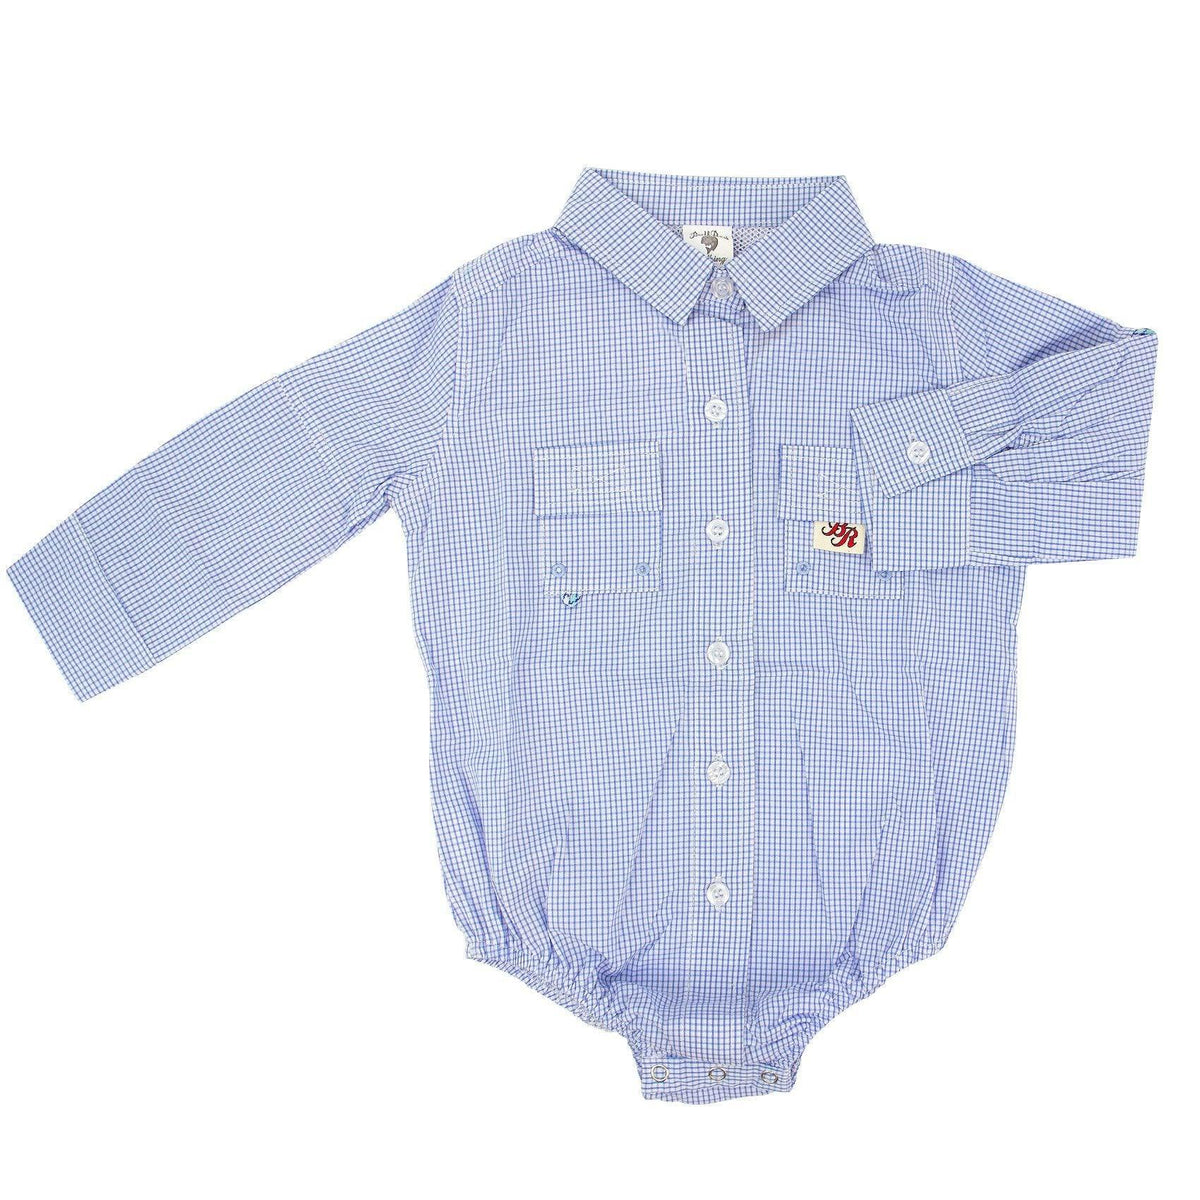 SIZE 3 MONTH BLUE GINGHAM PRINT "BULLRED" BABY ONE-PIECE FISHING OUTFIT Fishing Shirt Bull Red 